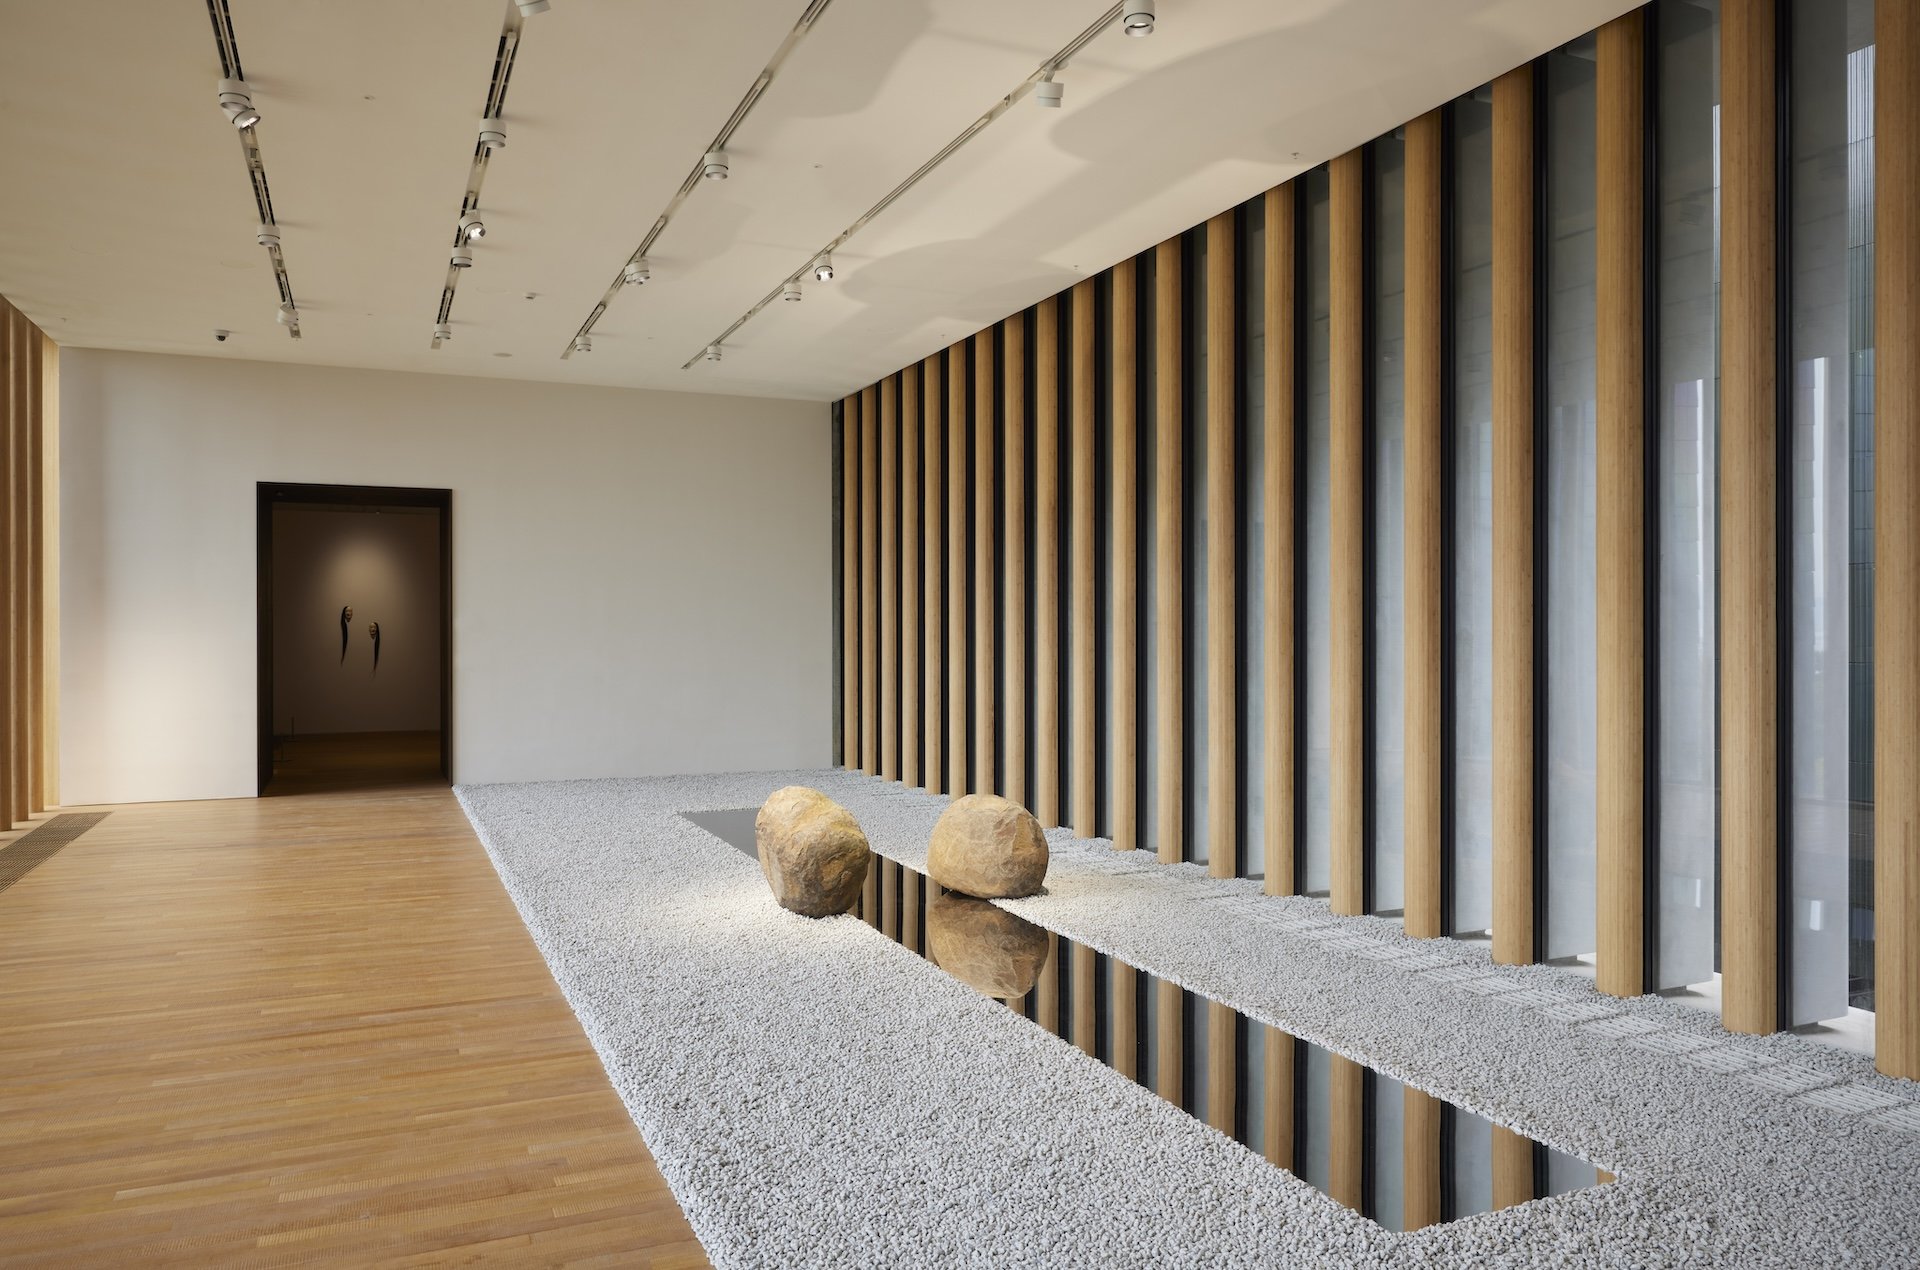 Grey pebbles carpet half of the wooden floor along the length of a corridor gallery. On the pebbles, a long stainless-steel plate with a mirror surface stretches across the room with two stones placed opposite each other at the centre. The steel plate reflects the surrounding environment.